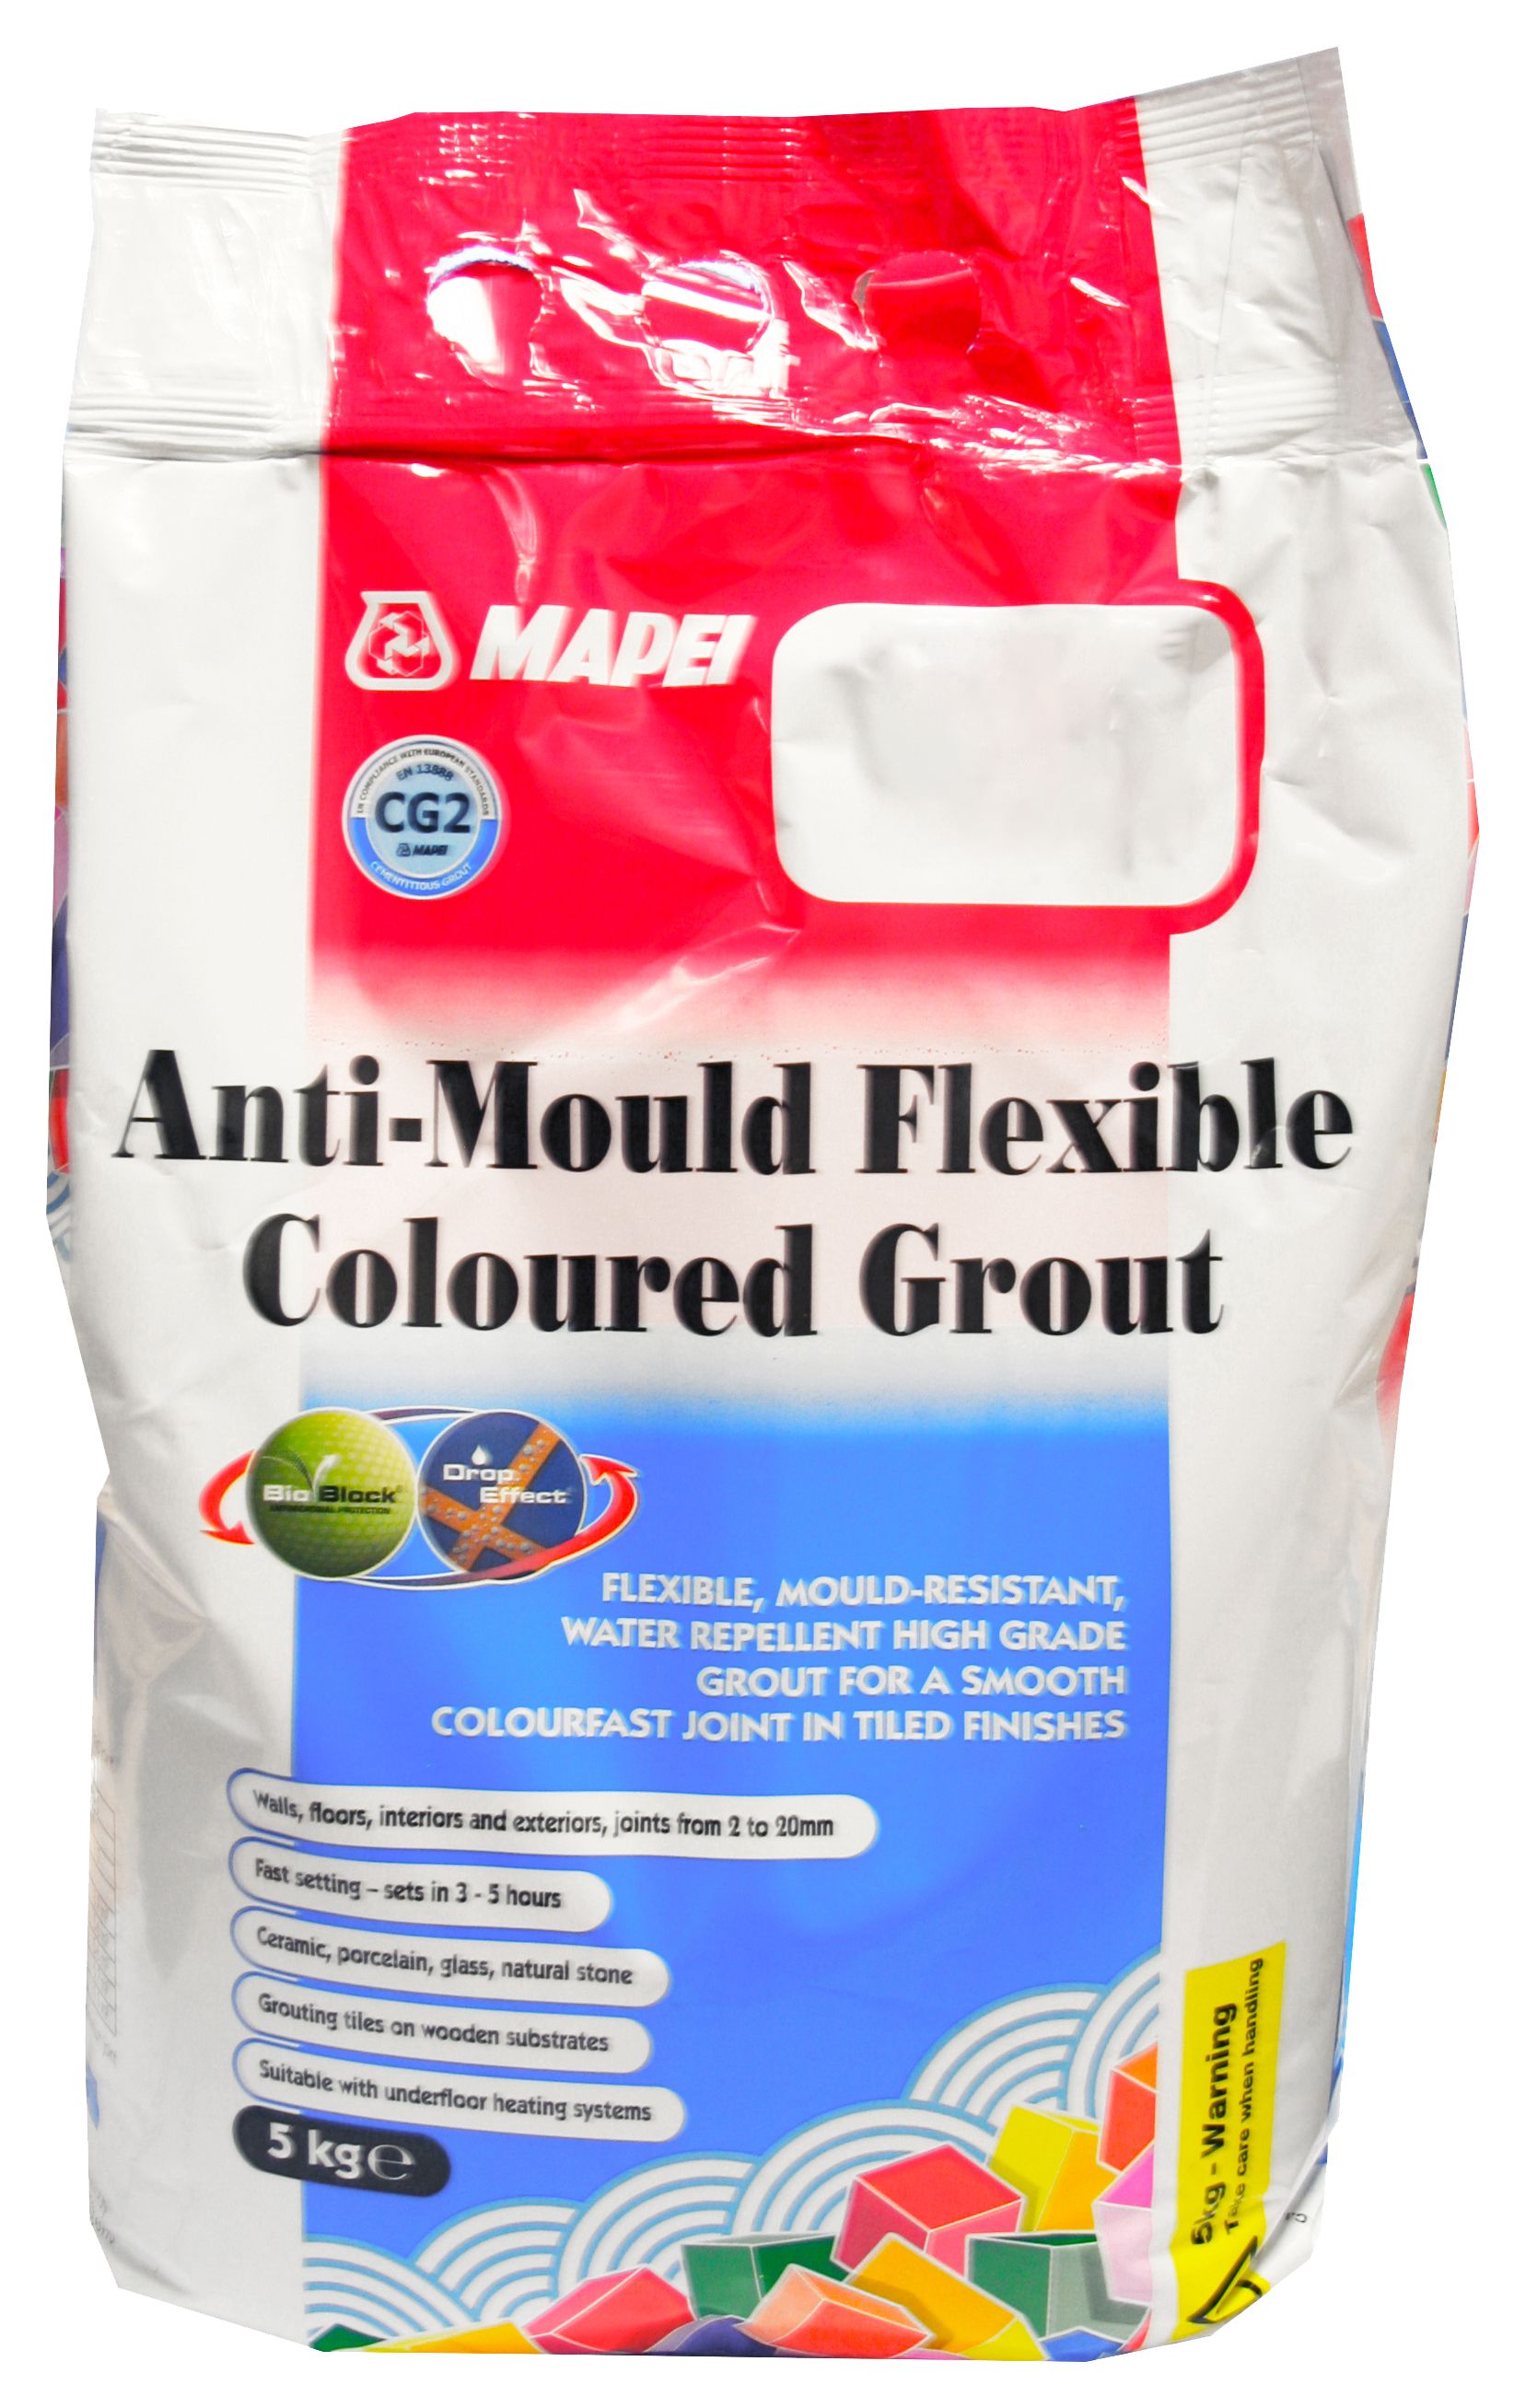 Image of Mapei Anti-Mould Flexible Coloured Tile Grout White 5kg